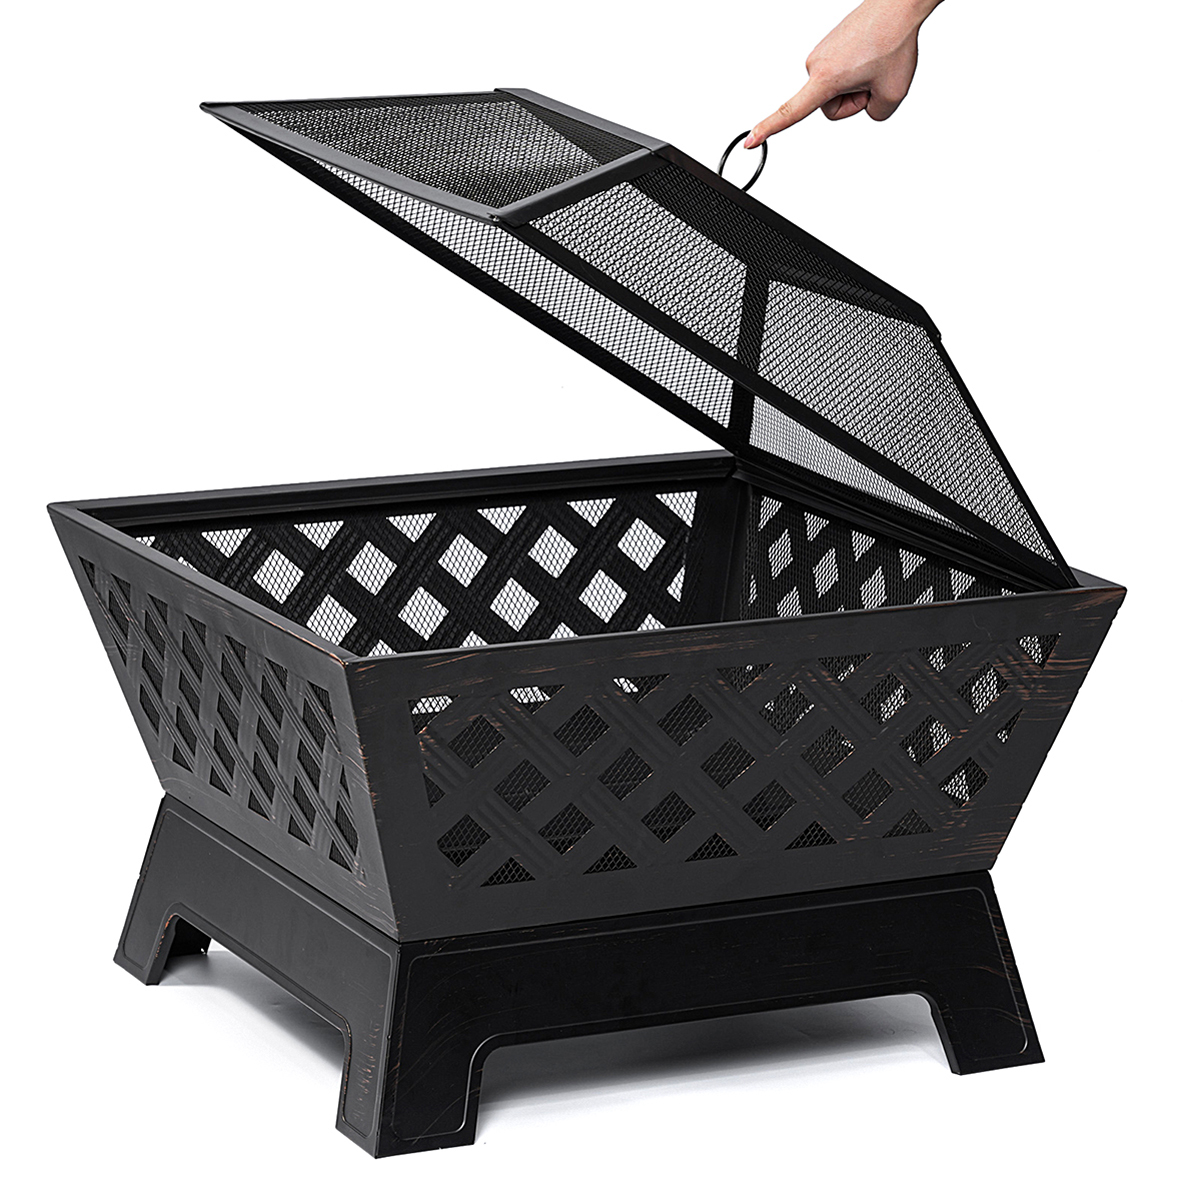 Kingso-26--Inch-Fire-Pits-Large-Wood-Burning-Square-Firepit-with-Ash-Plate-Spark-Screen-Log-Grate-Po-1920540-9